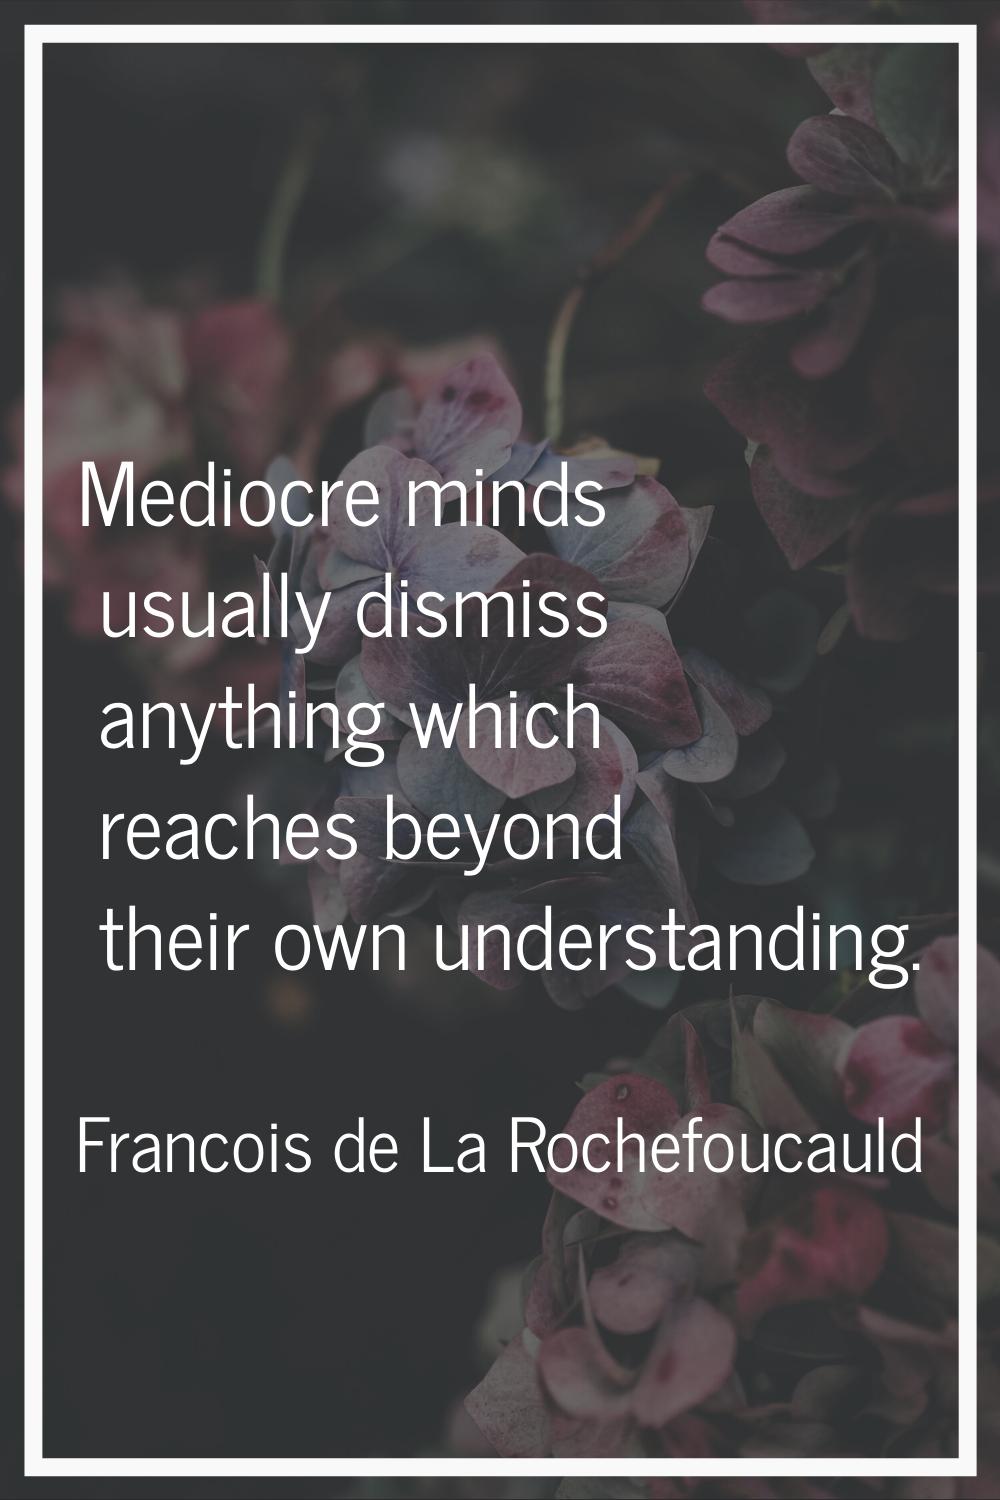 Mediocre minds usually dismiss anything which reaches beyond their own understanding.